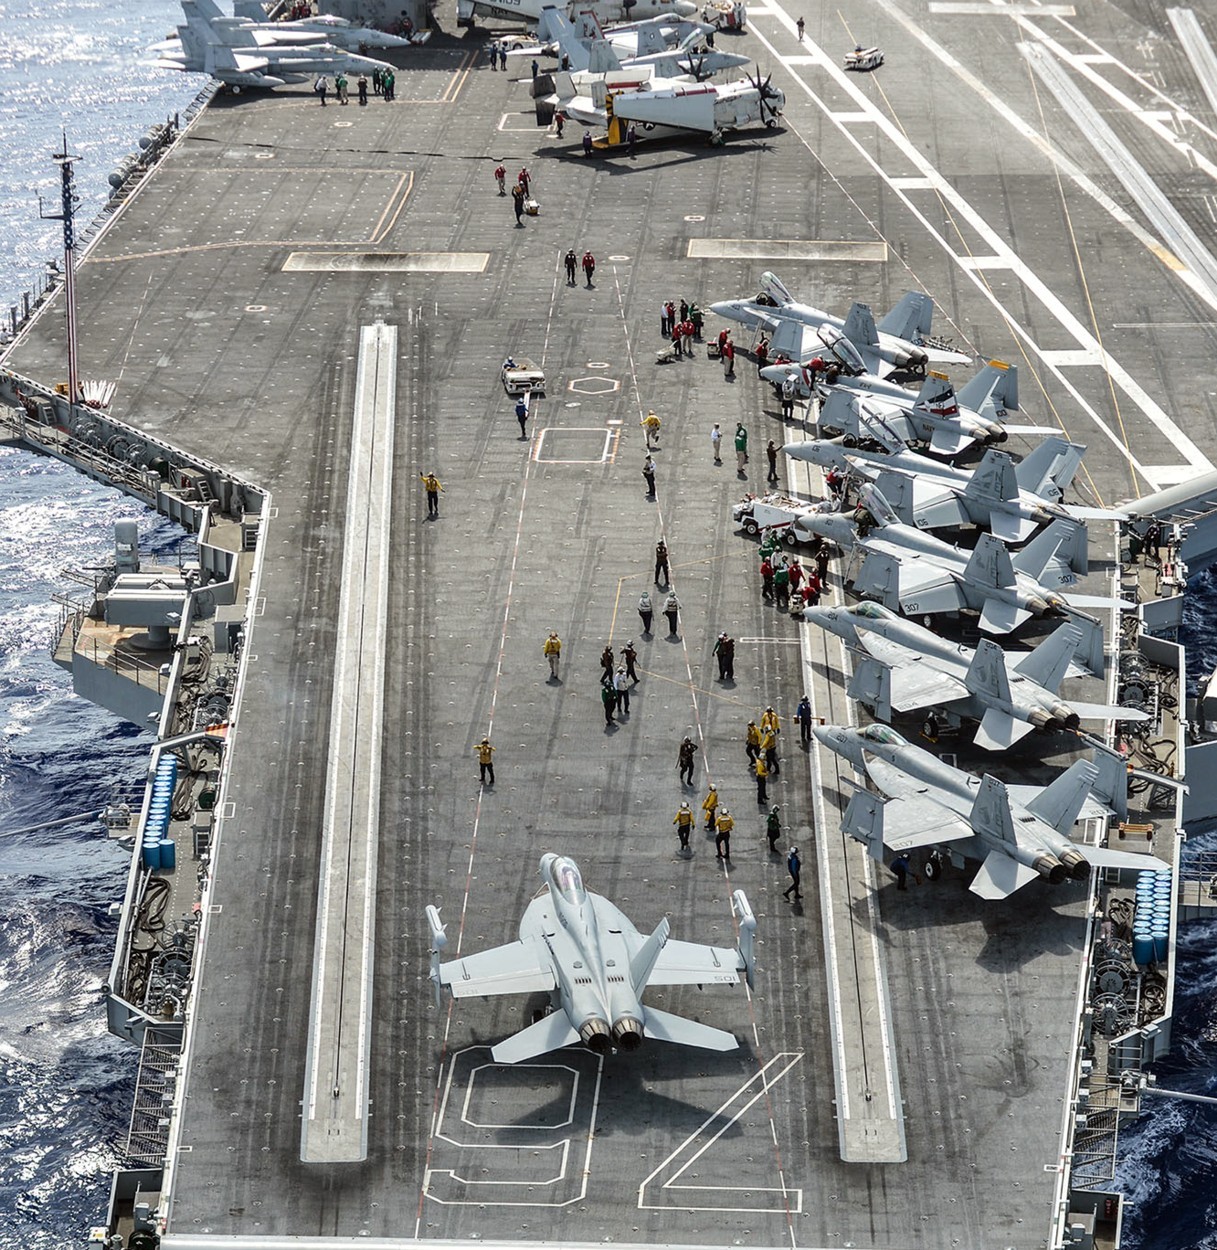 cvw-2 carrier air wing us navy uss ronald reagan cvn-76 embarked squadrons 19